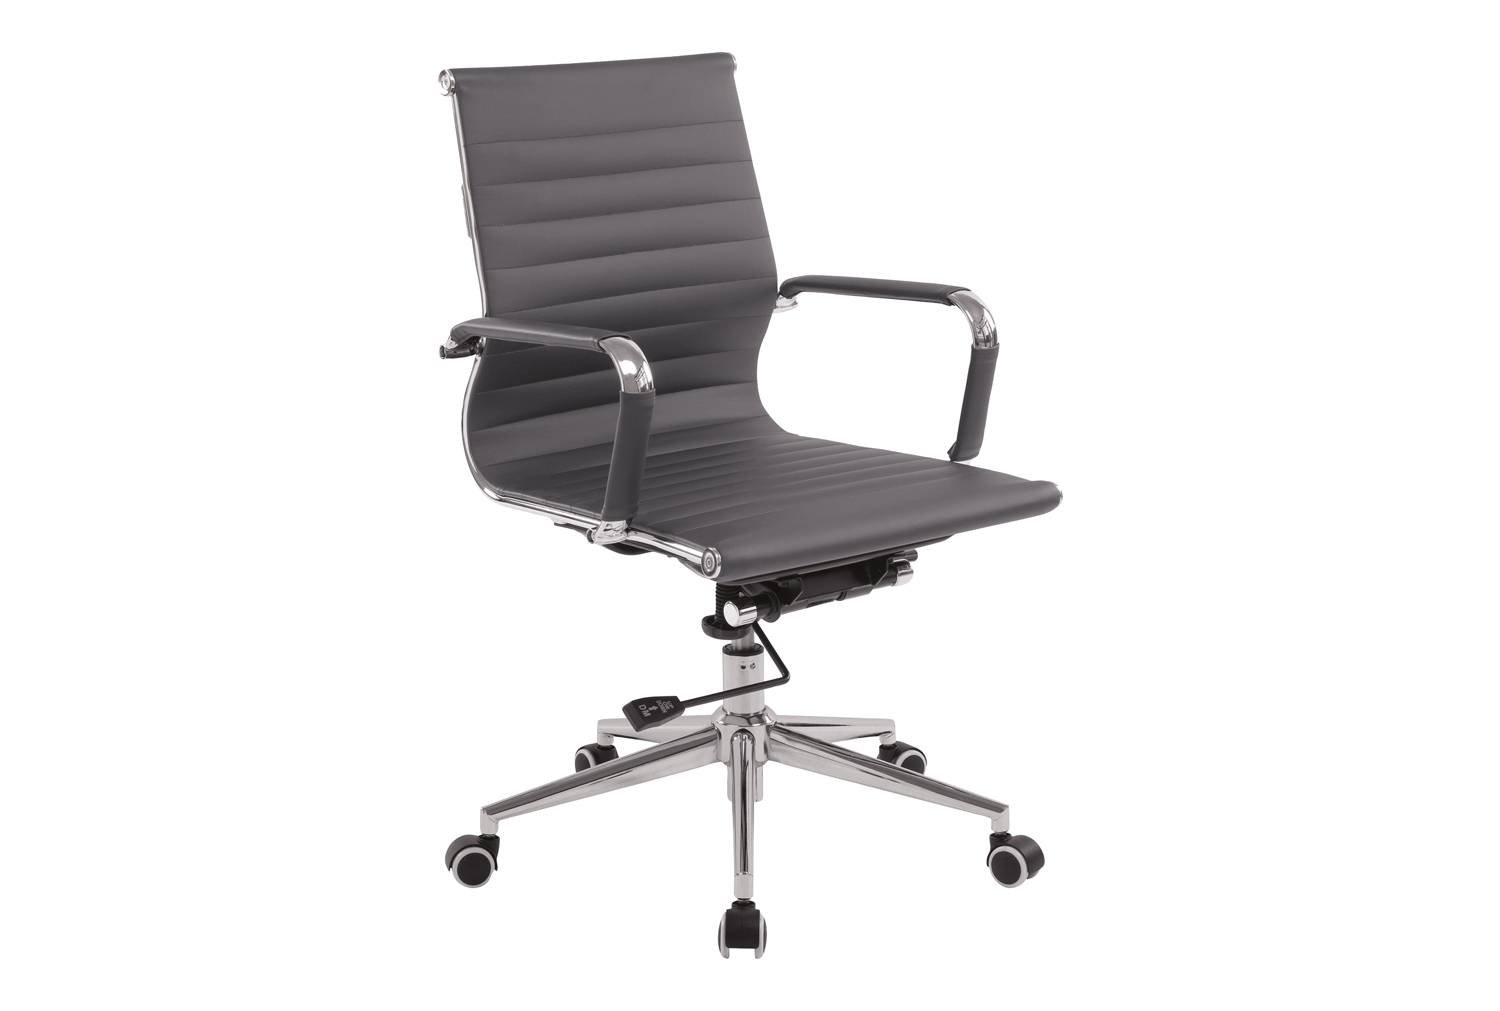 Andruzzi Medium Back Bonded Leather Executive Office Chair (Grey), Grey, Express Delivery